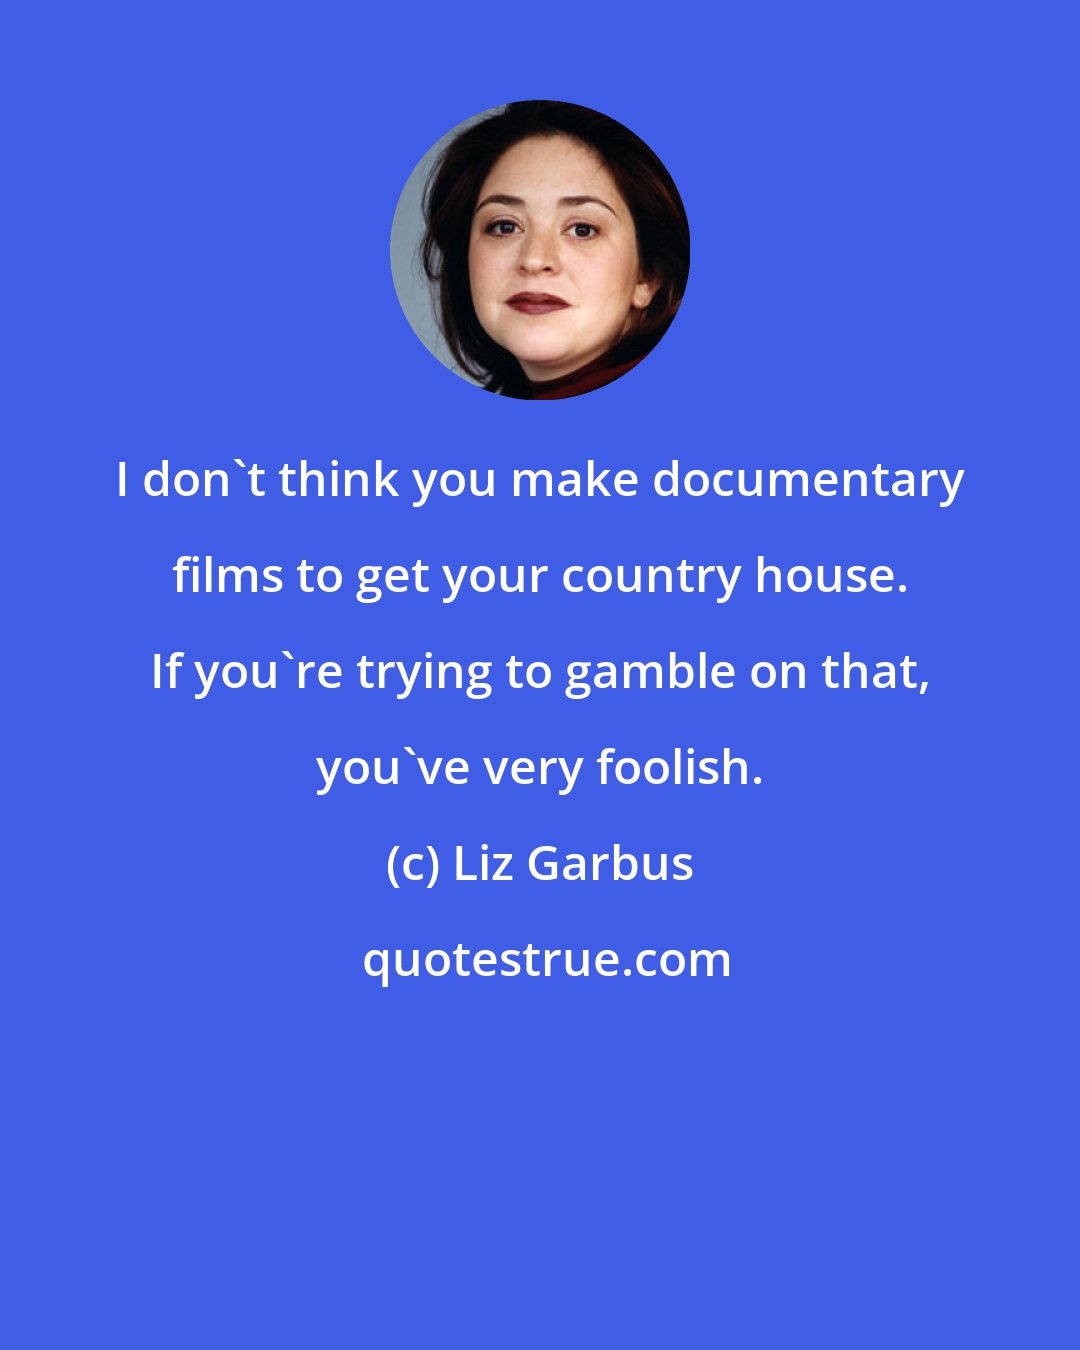 Liz Garbus: I don't think you make documentary films to get your country house. If you're trying to gamble on that, you've very foolish.